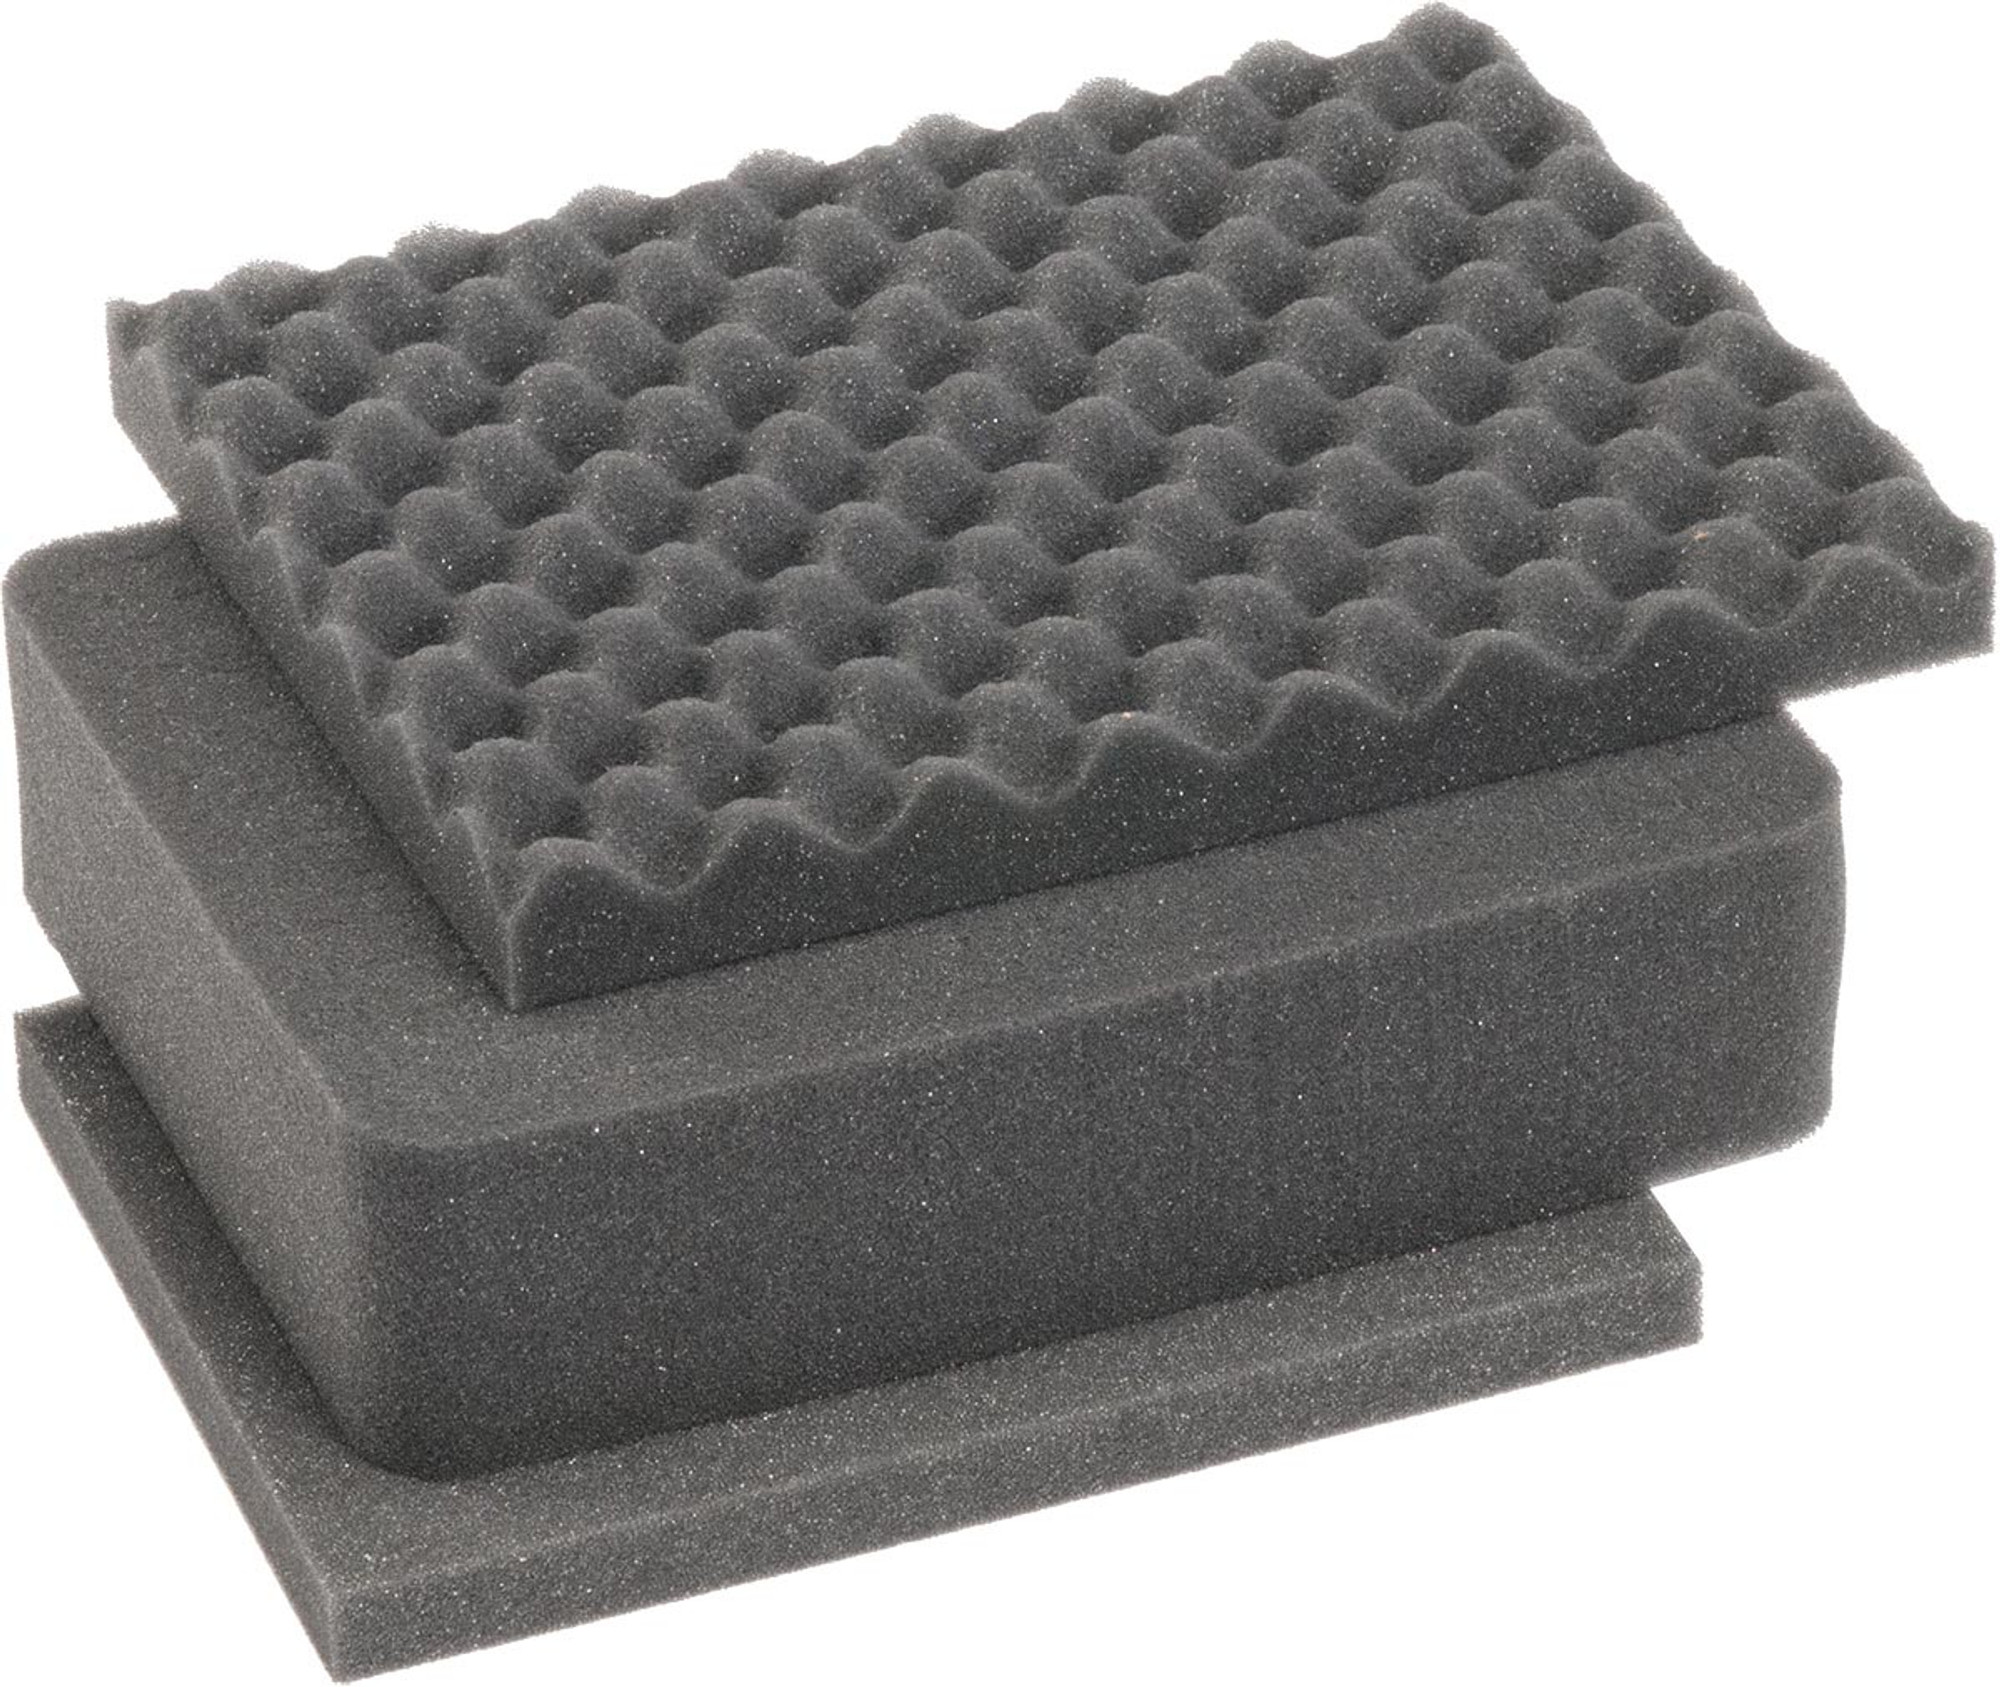 EMG Replacement Pull and Pluck Foam Set for 51 Rifle Cases